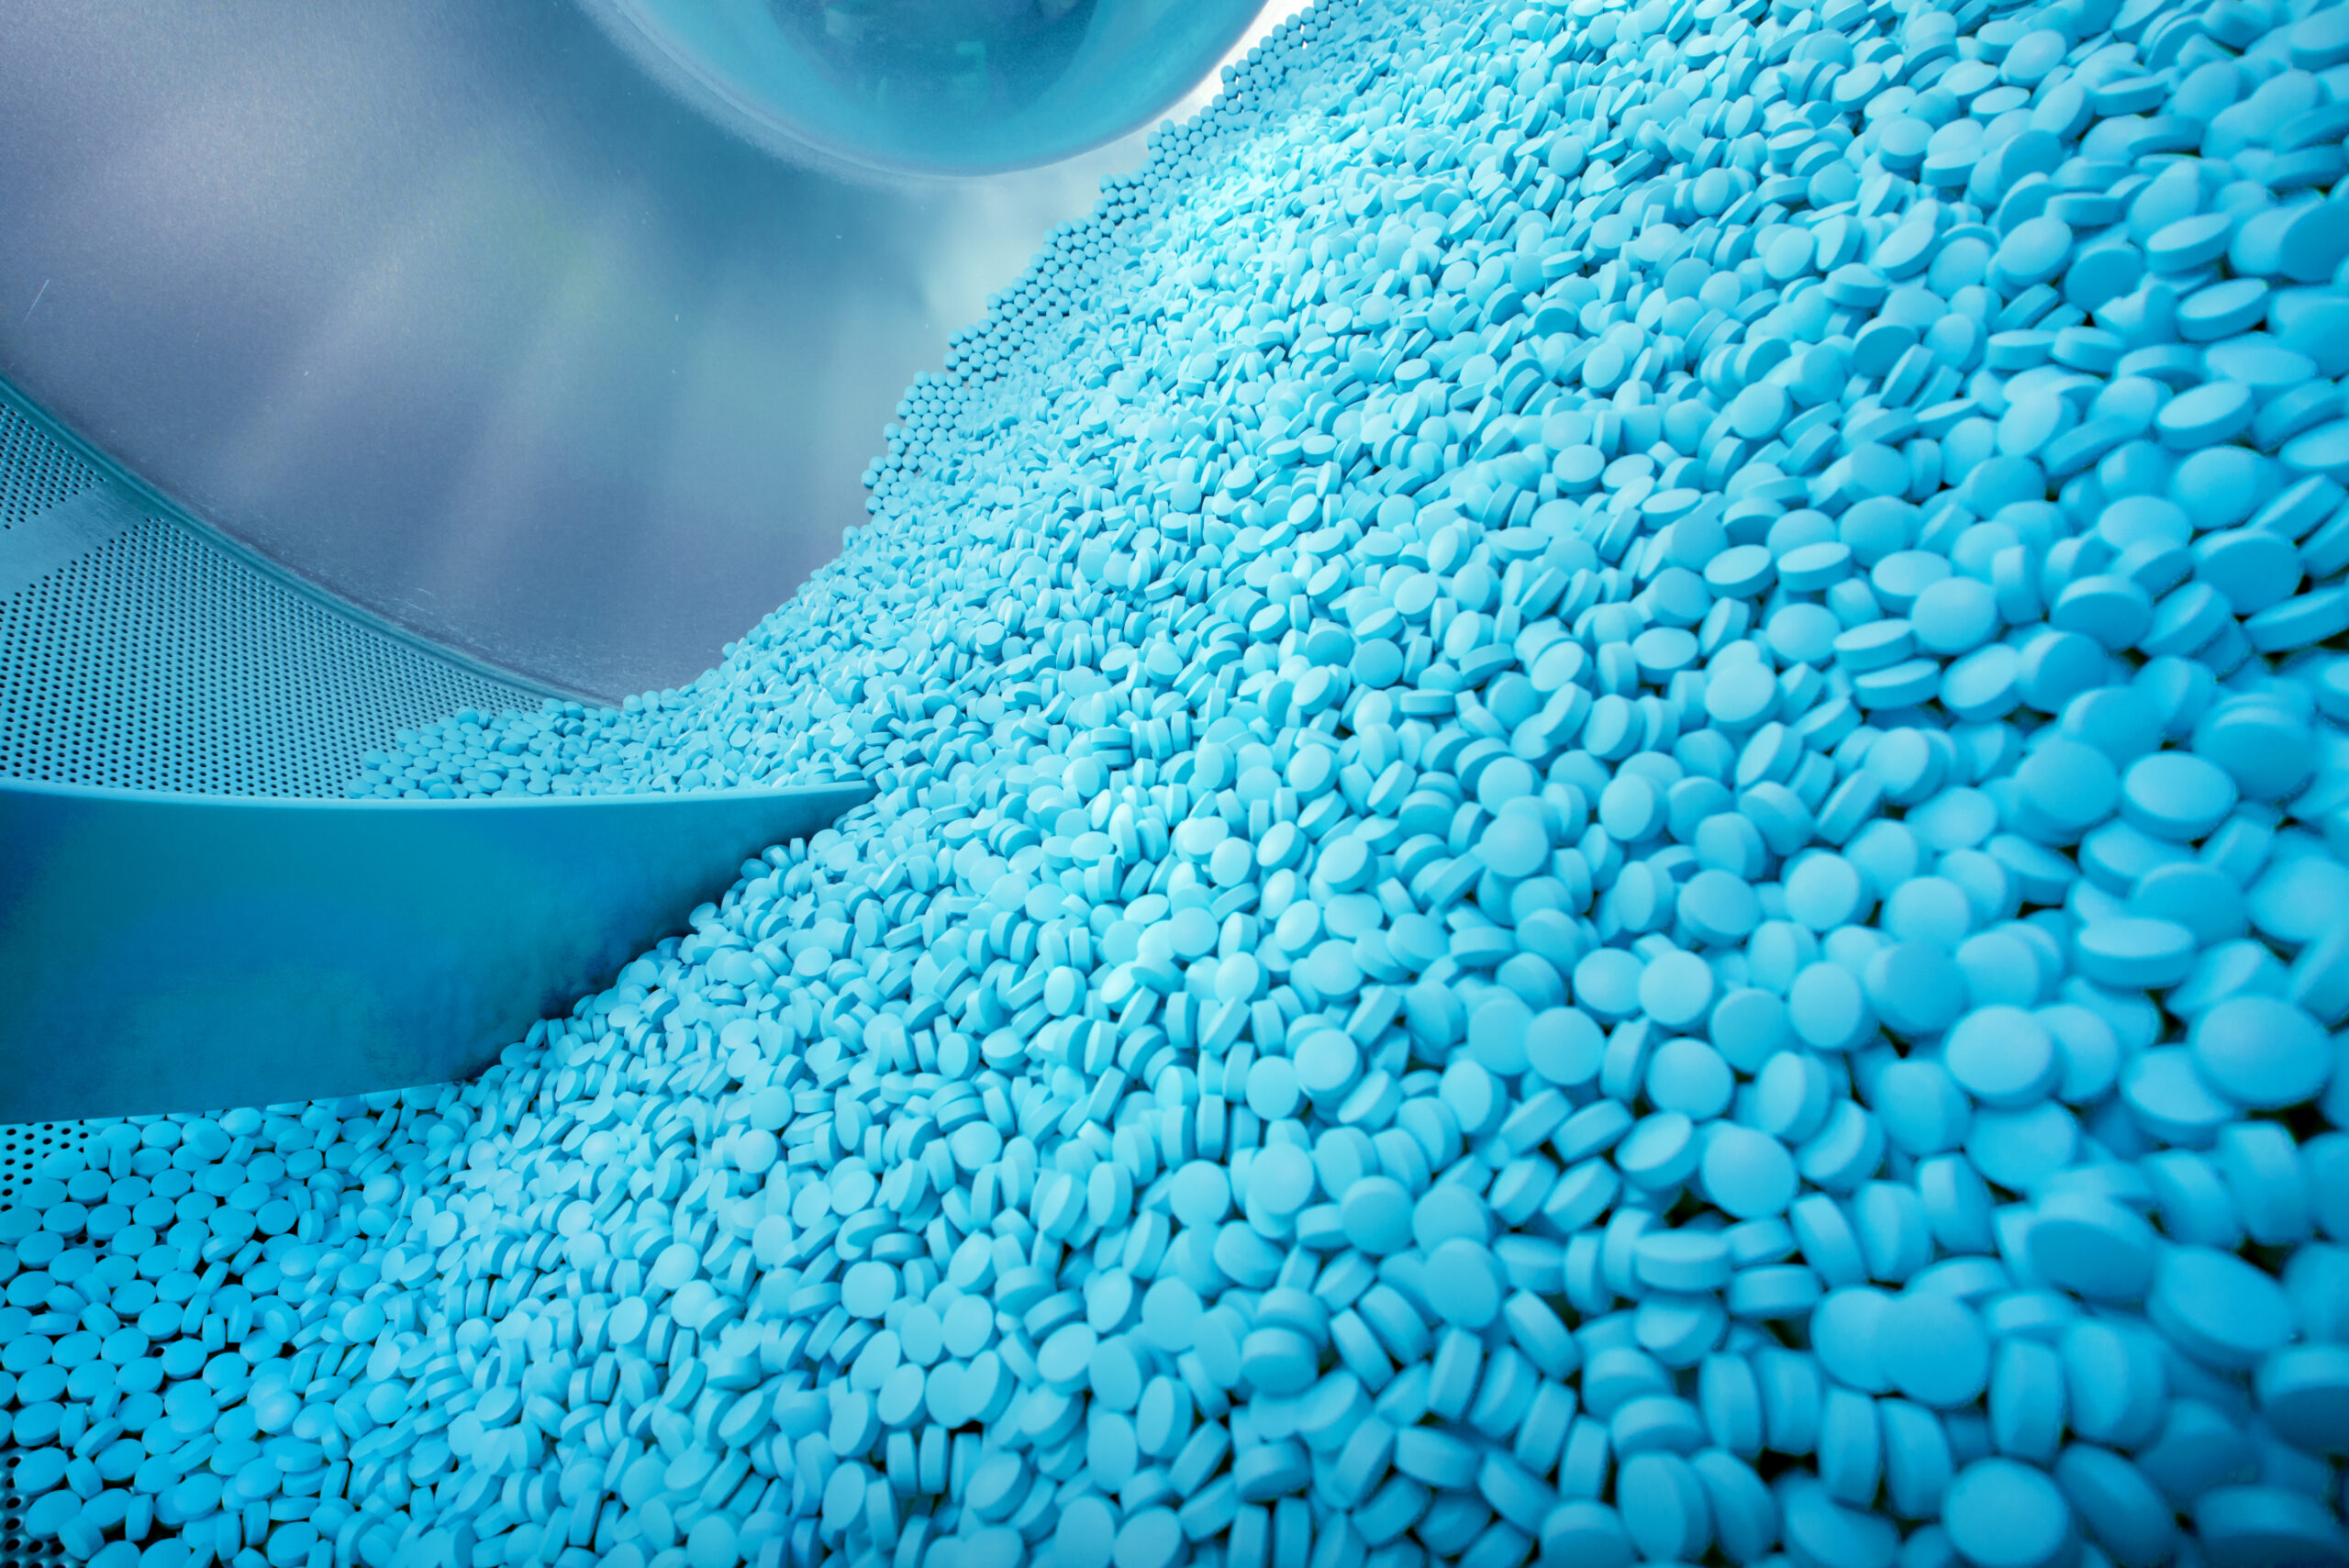 Optimising pharmaceutical production with Industry 4.0